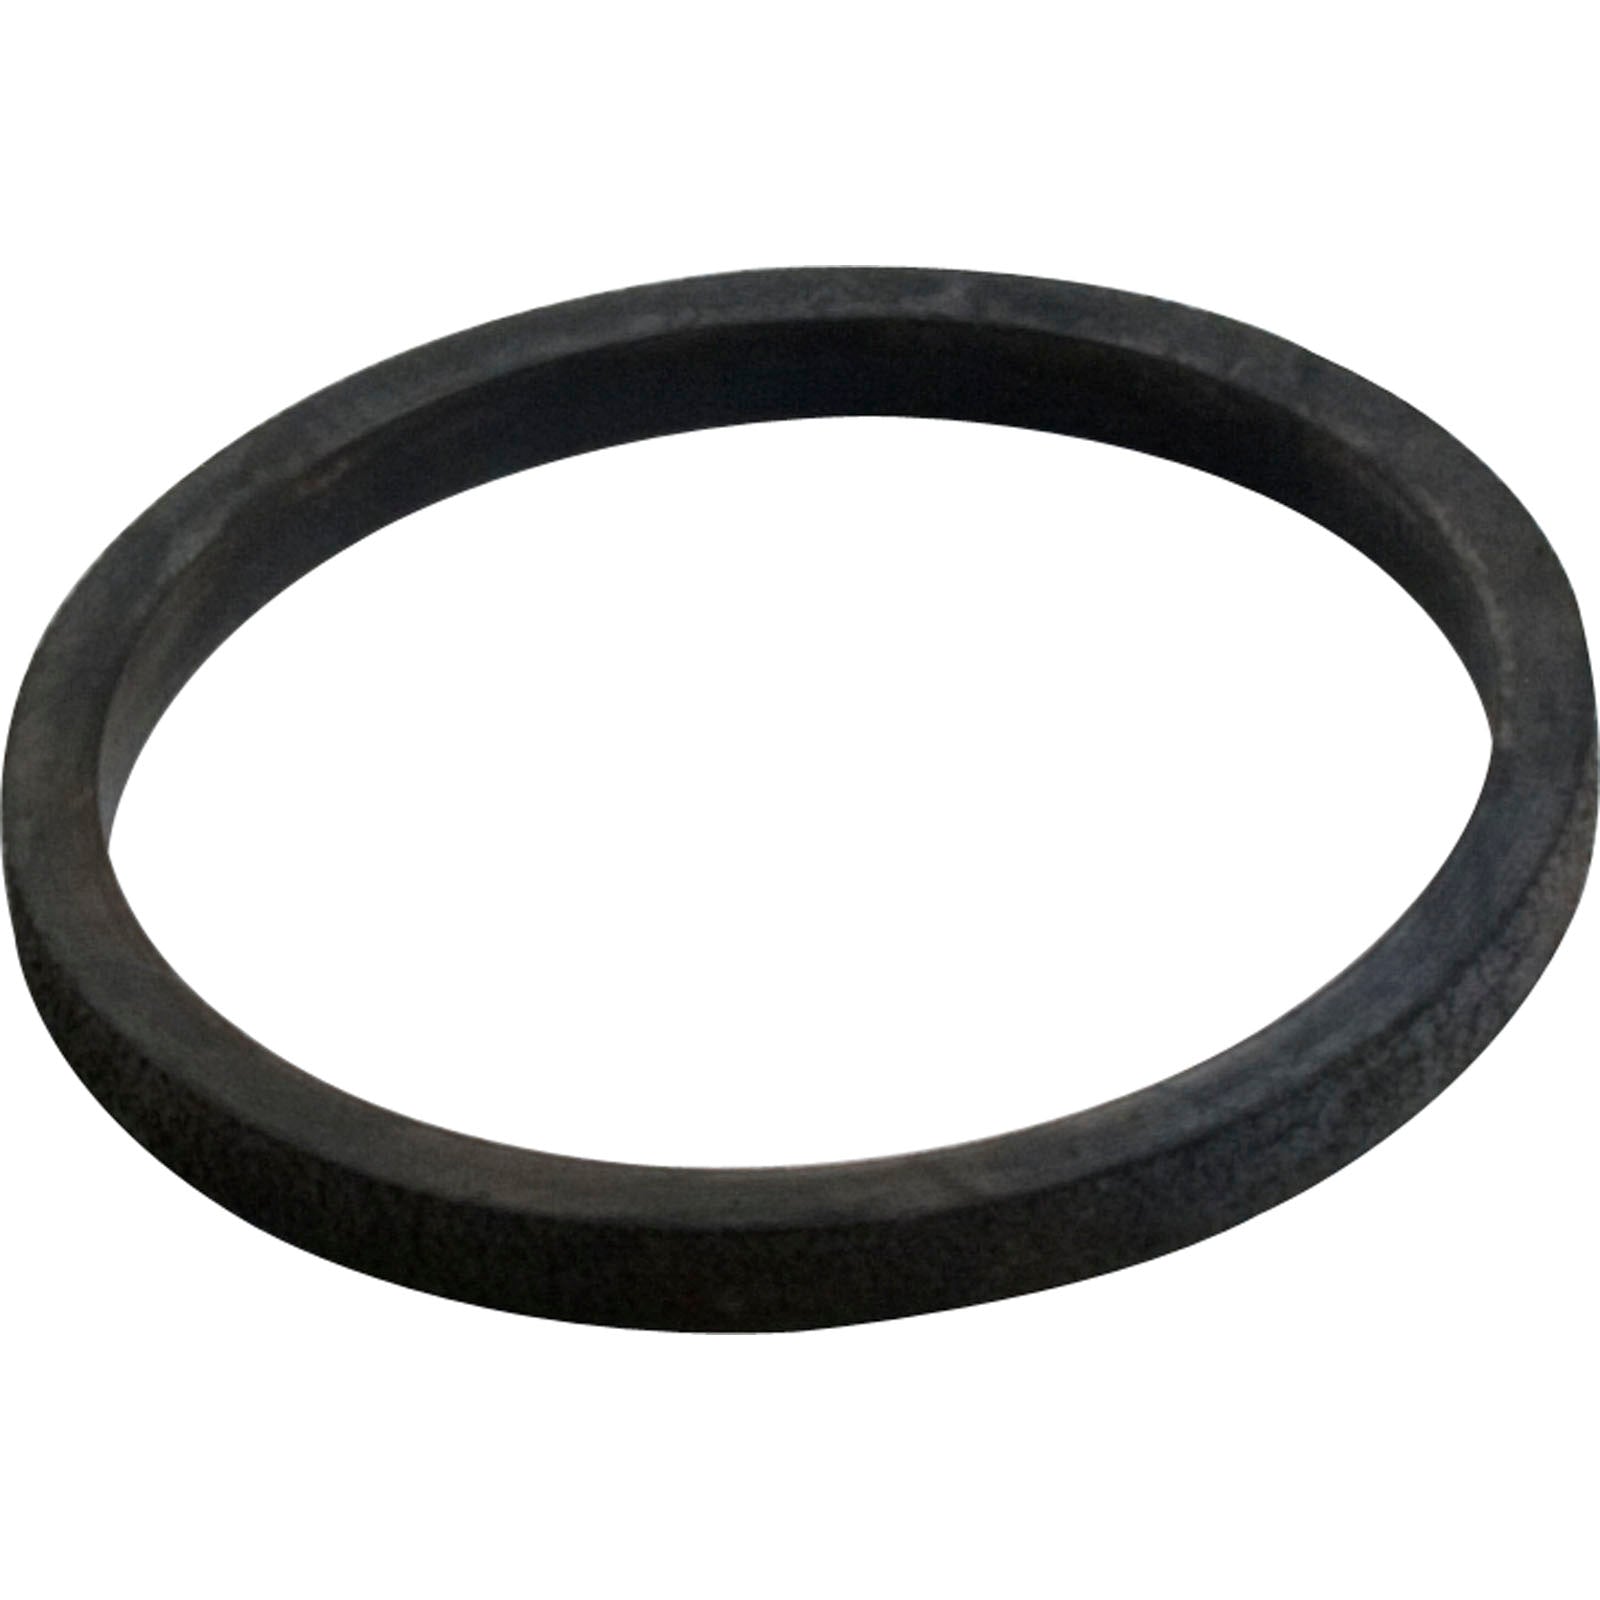 Adapter Square Ring/ 00B7027